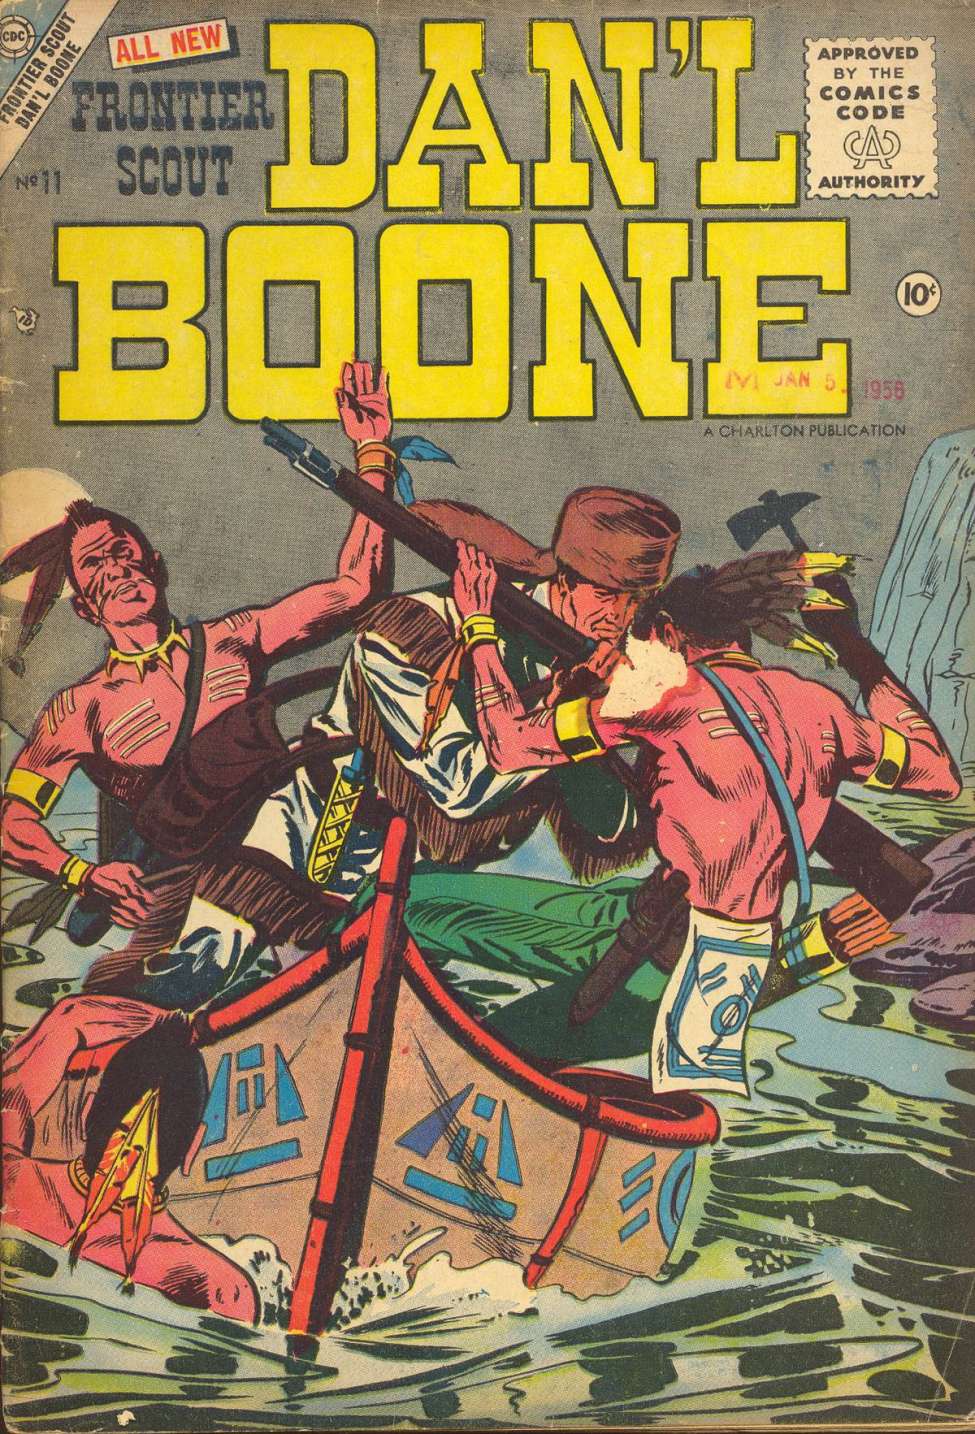 Comic Book Cover For Frontier Scout, Dan'l Boone 11